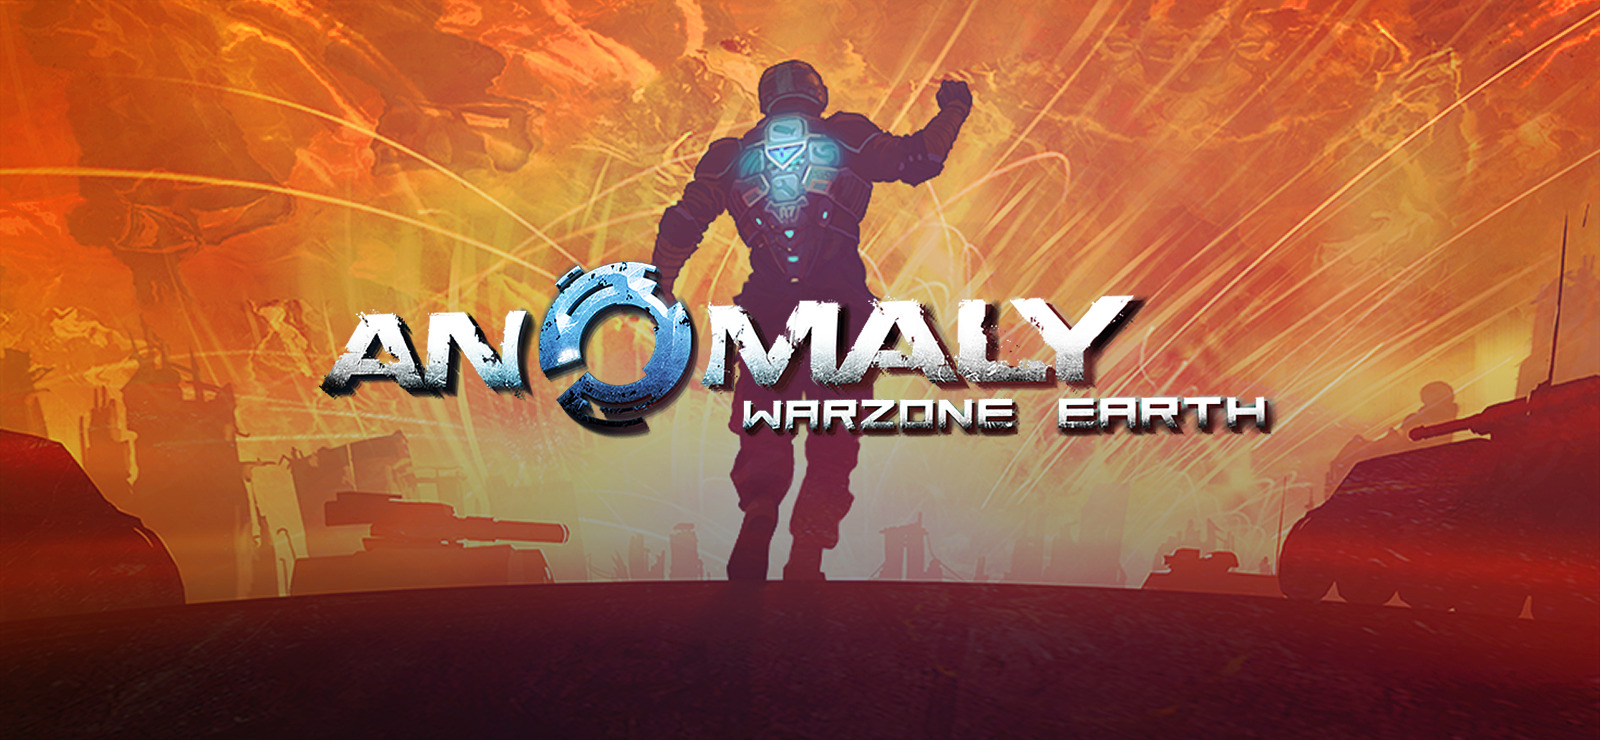 Steam anomaly warzone earth фото 6